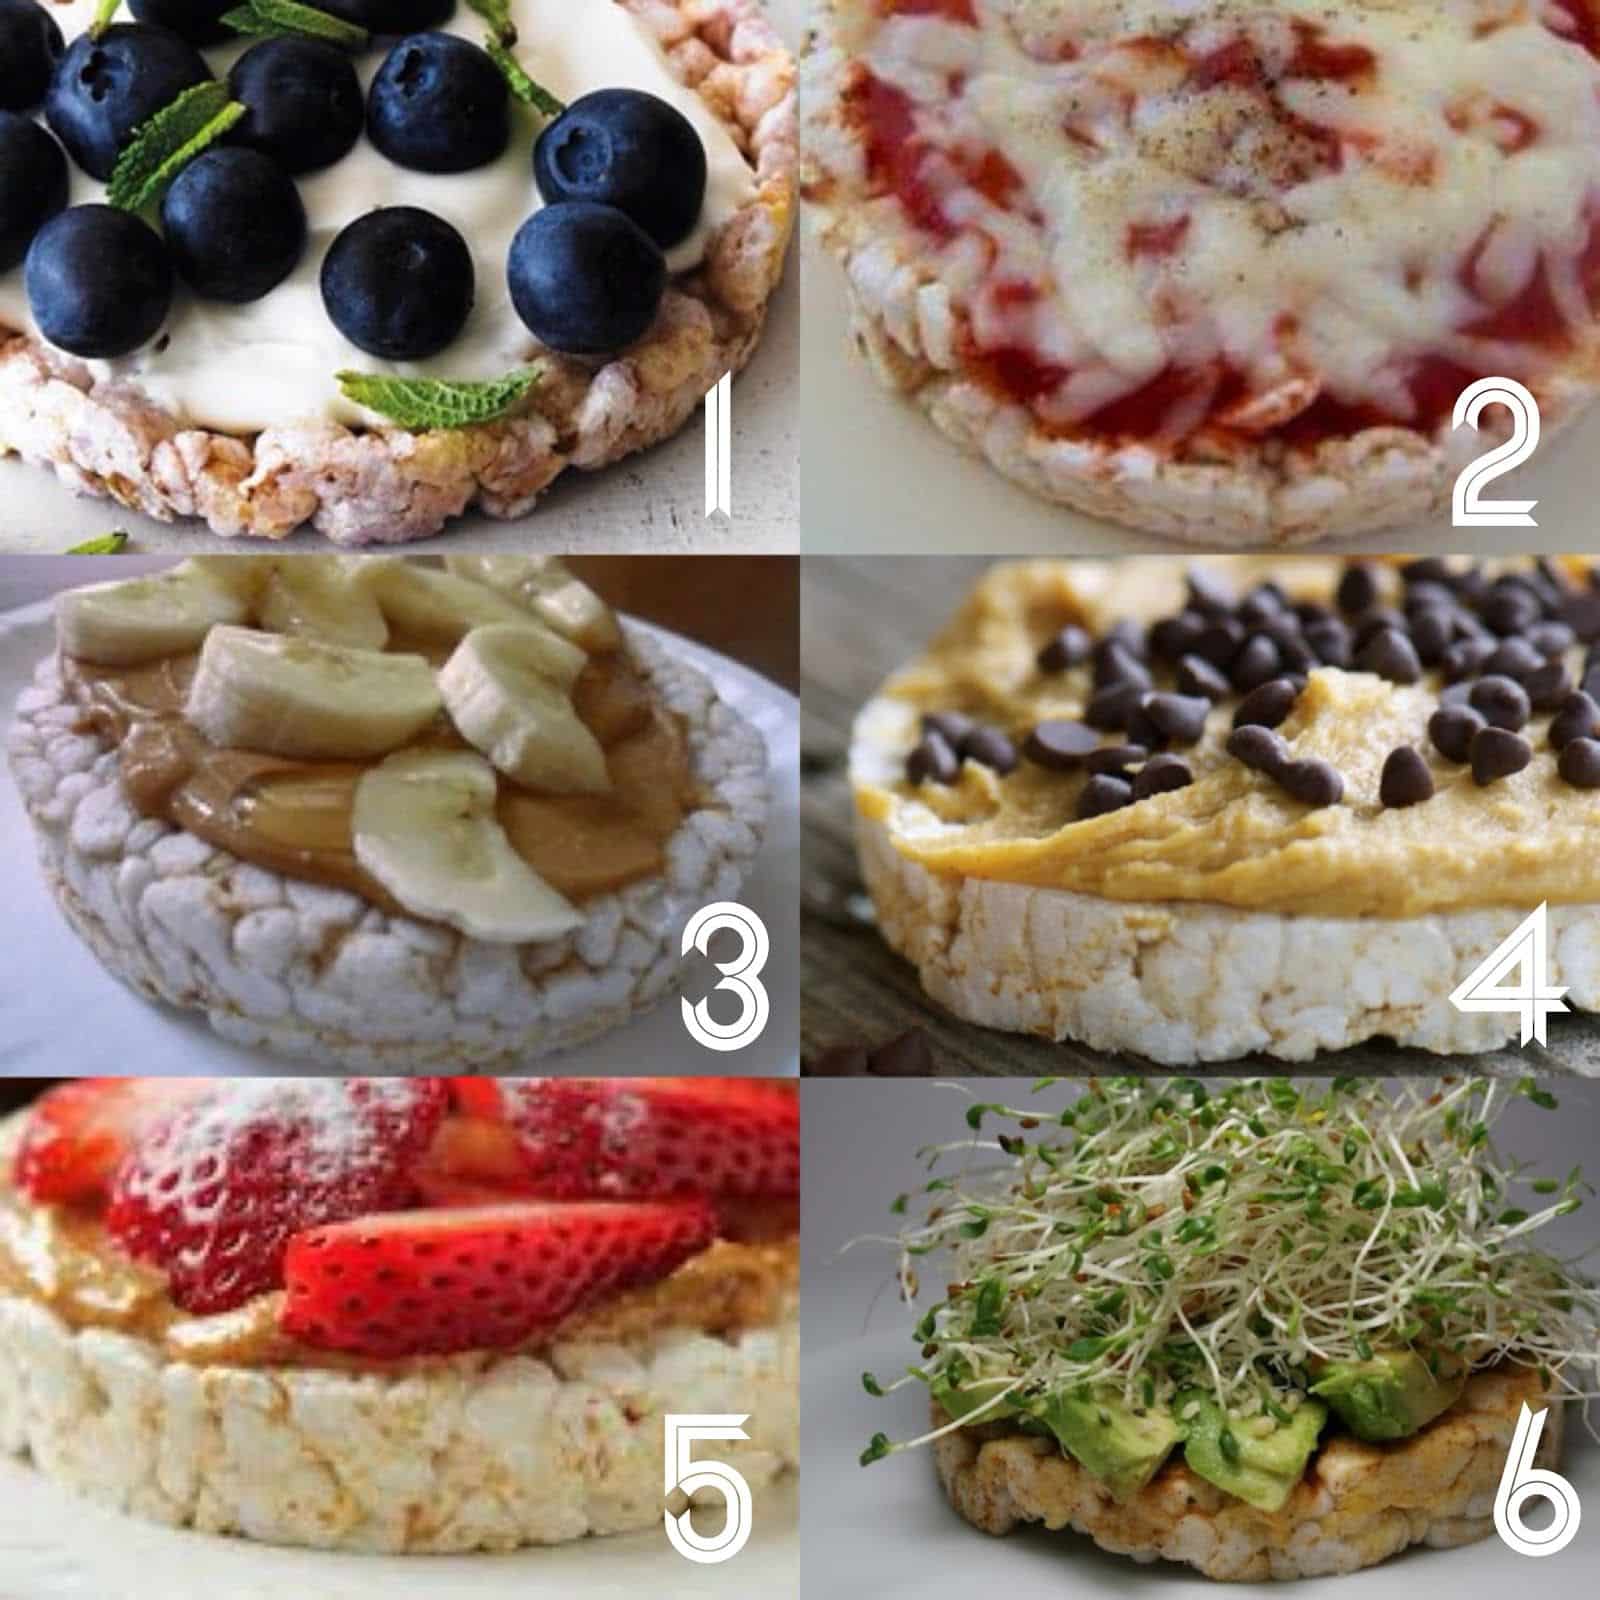 Winning Without Gluten: Rice Cake Combos